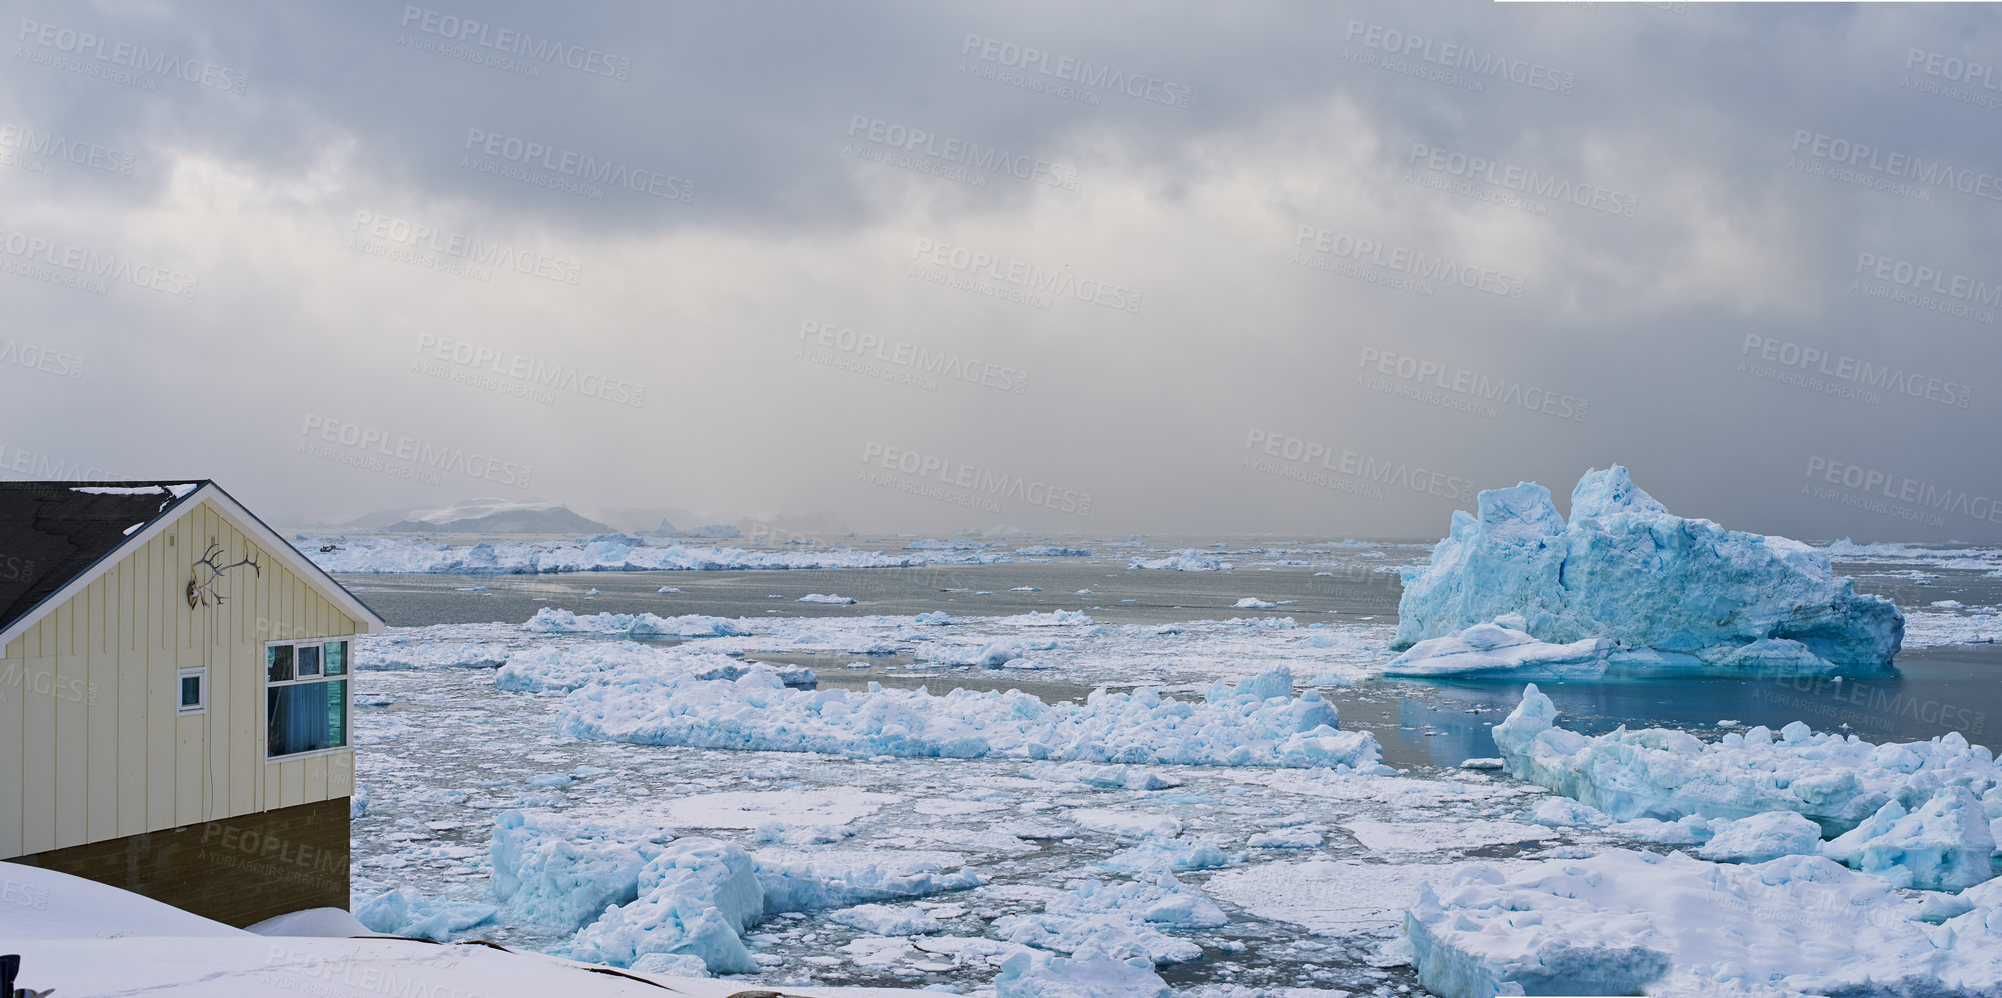 Buy stock photo A photo of the Ilulissat Icefjord, Greenland